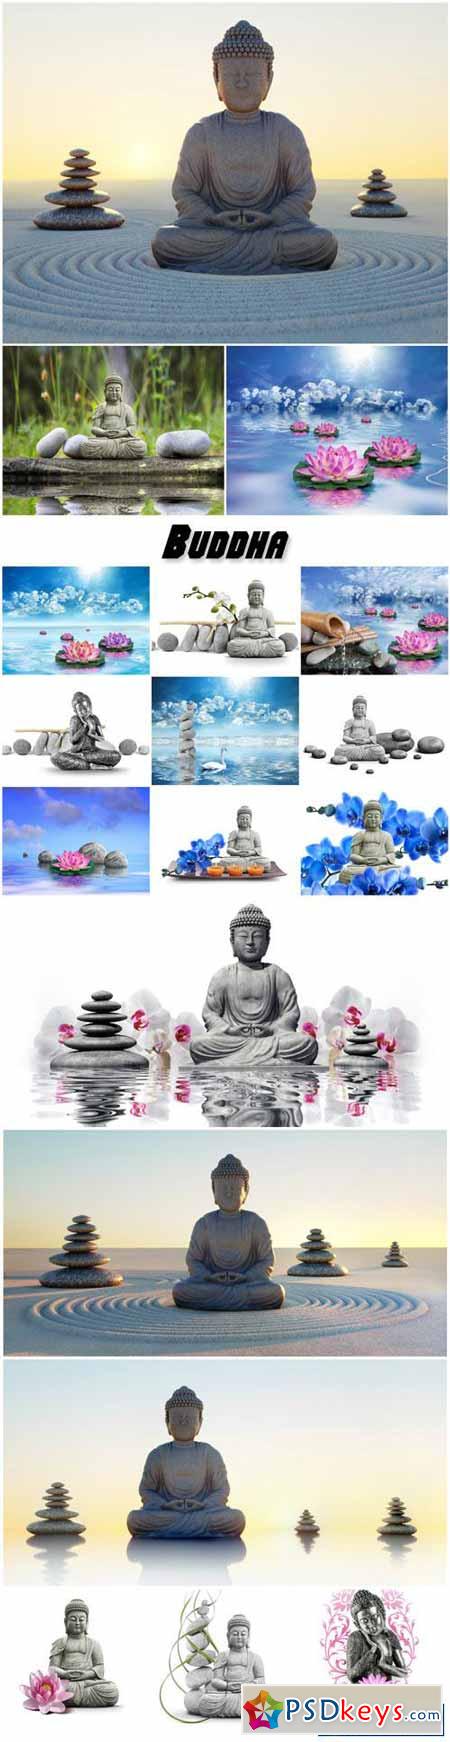 Buddha, spa background with stones and lotus